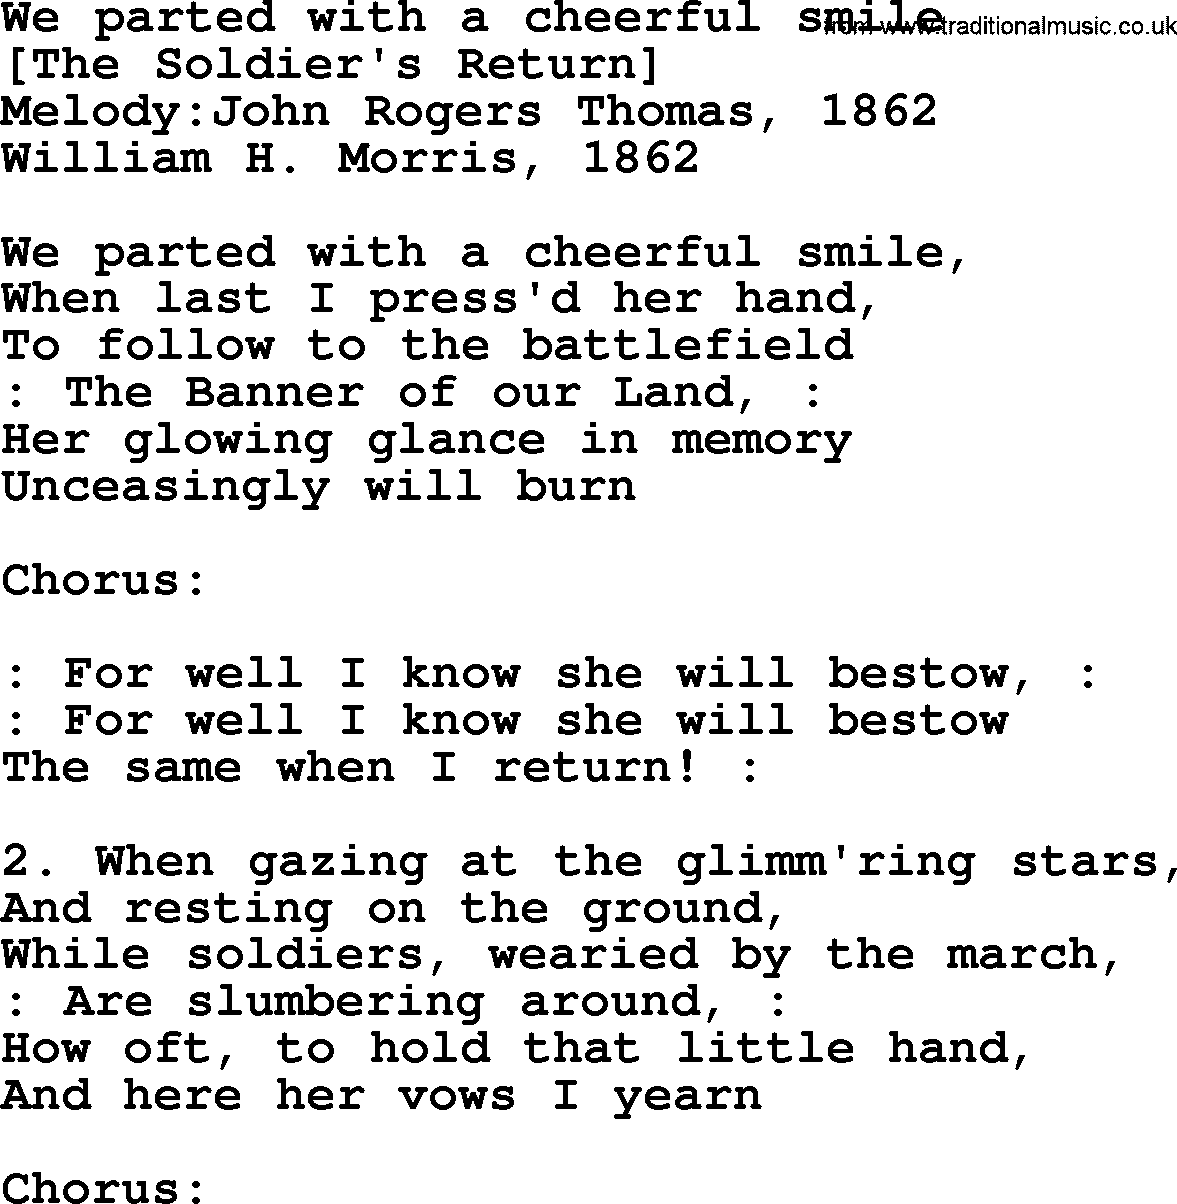 Old American Song: We Parted With A Cheerful Smile, lyrics